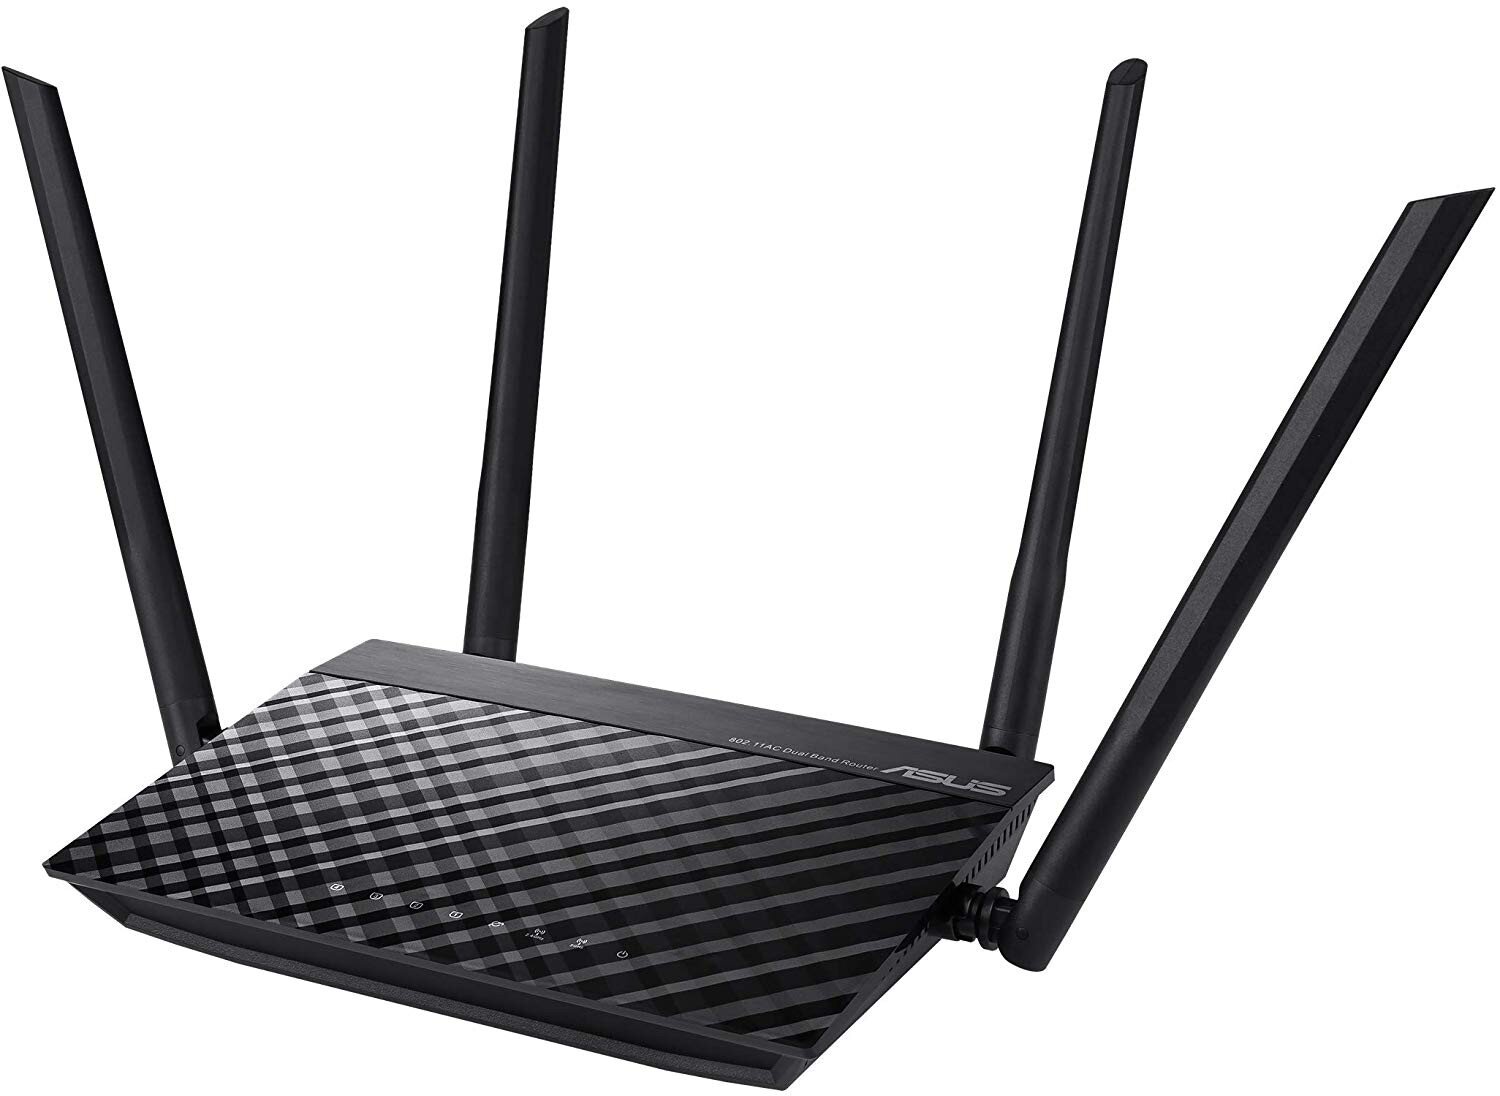 Decorative image of a router